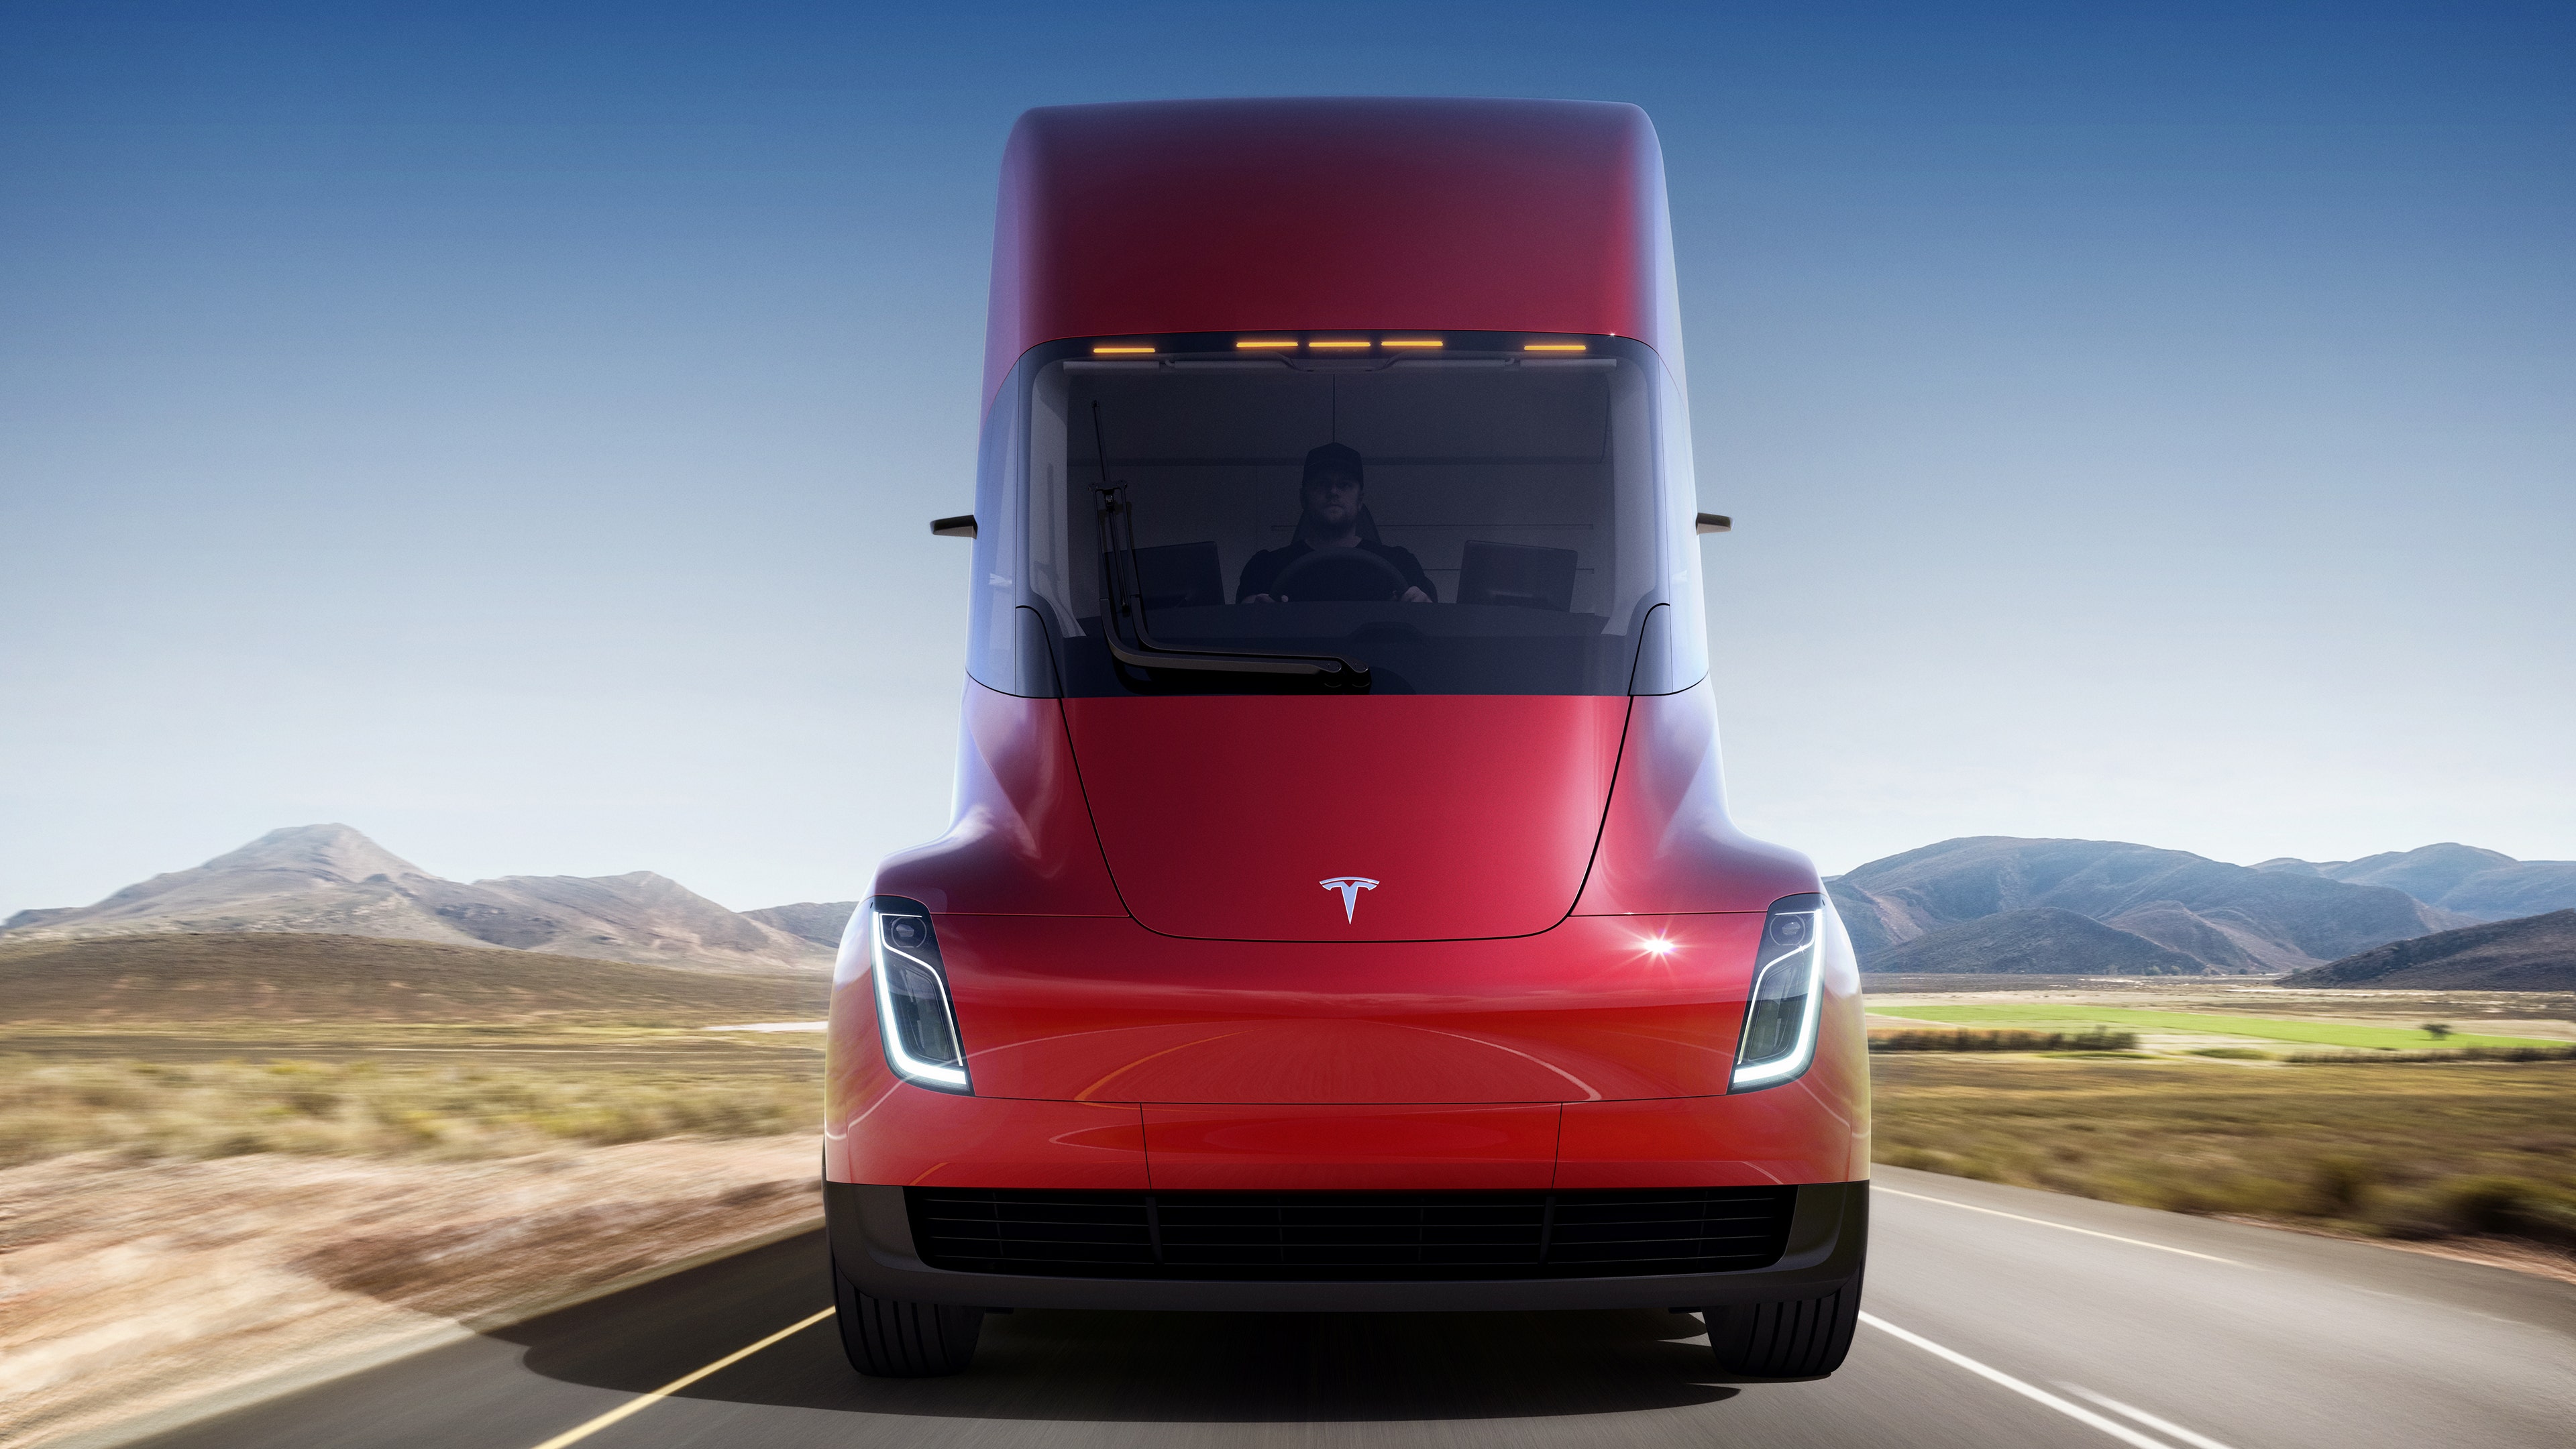 Tesla Rumored To Start Semi Production In July, Aiming For 2,500 Units By Year's End